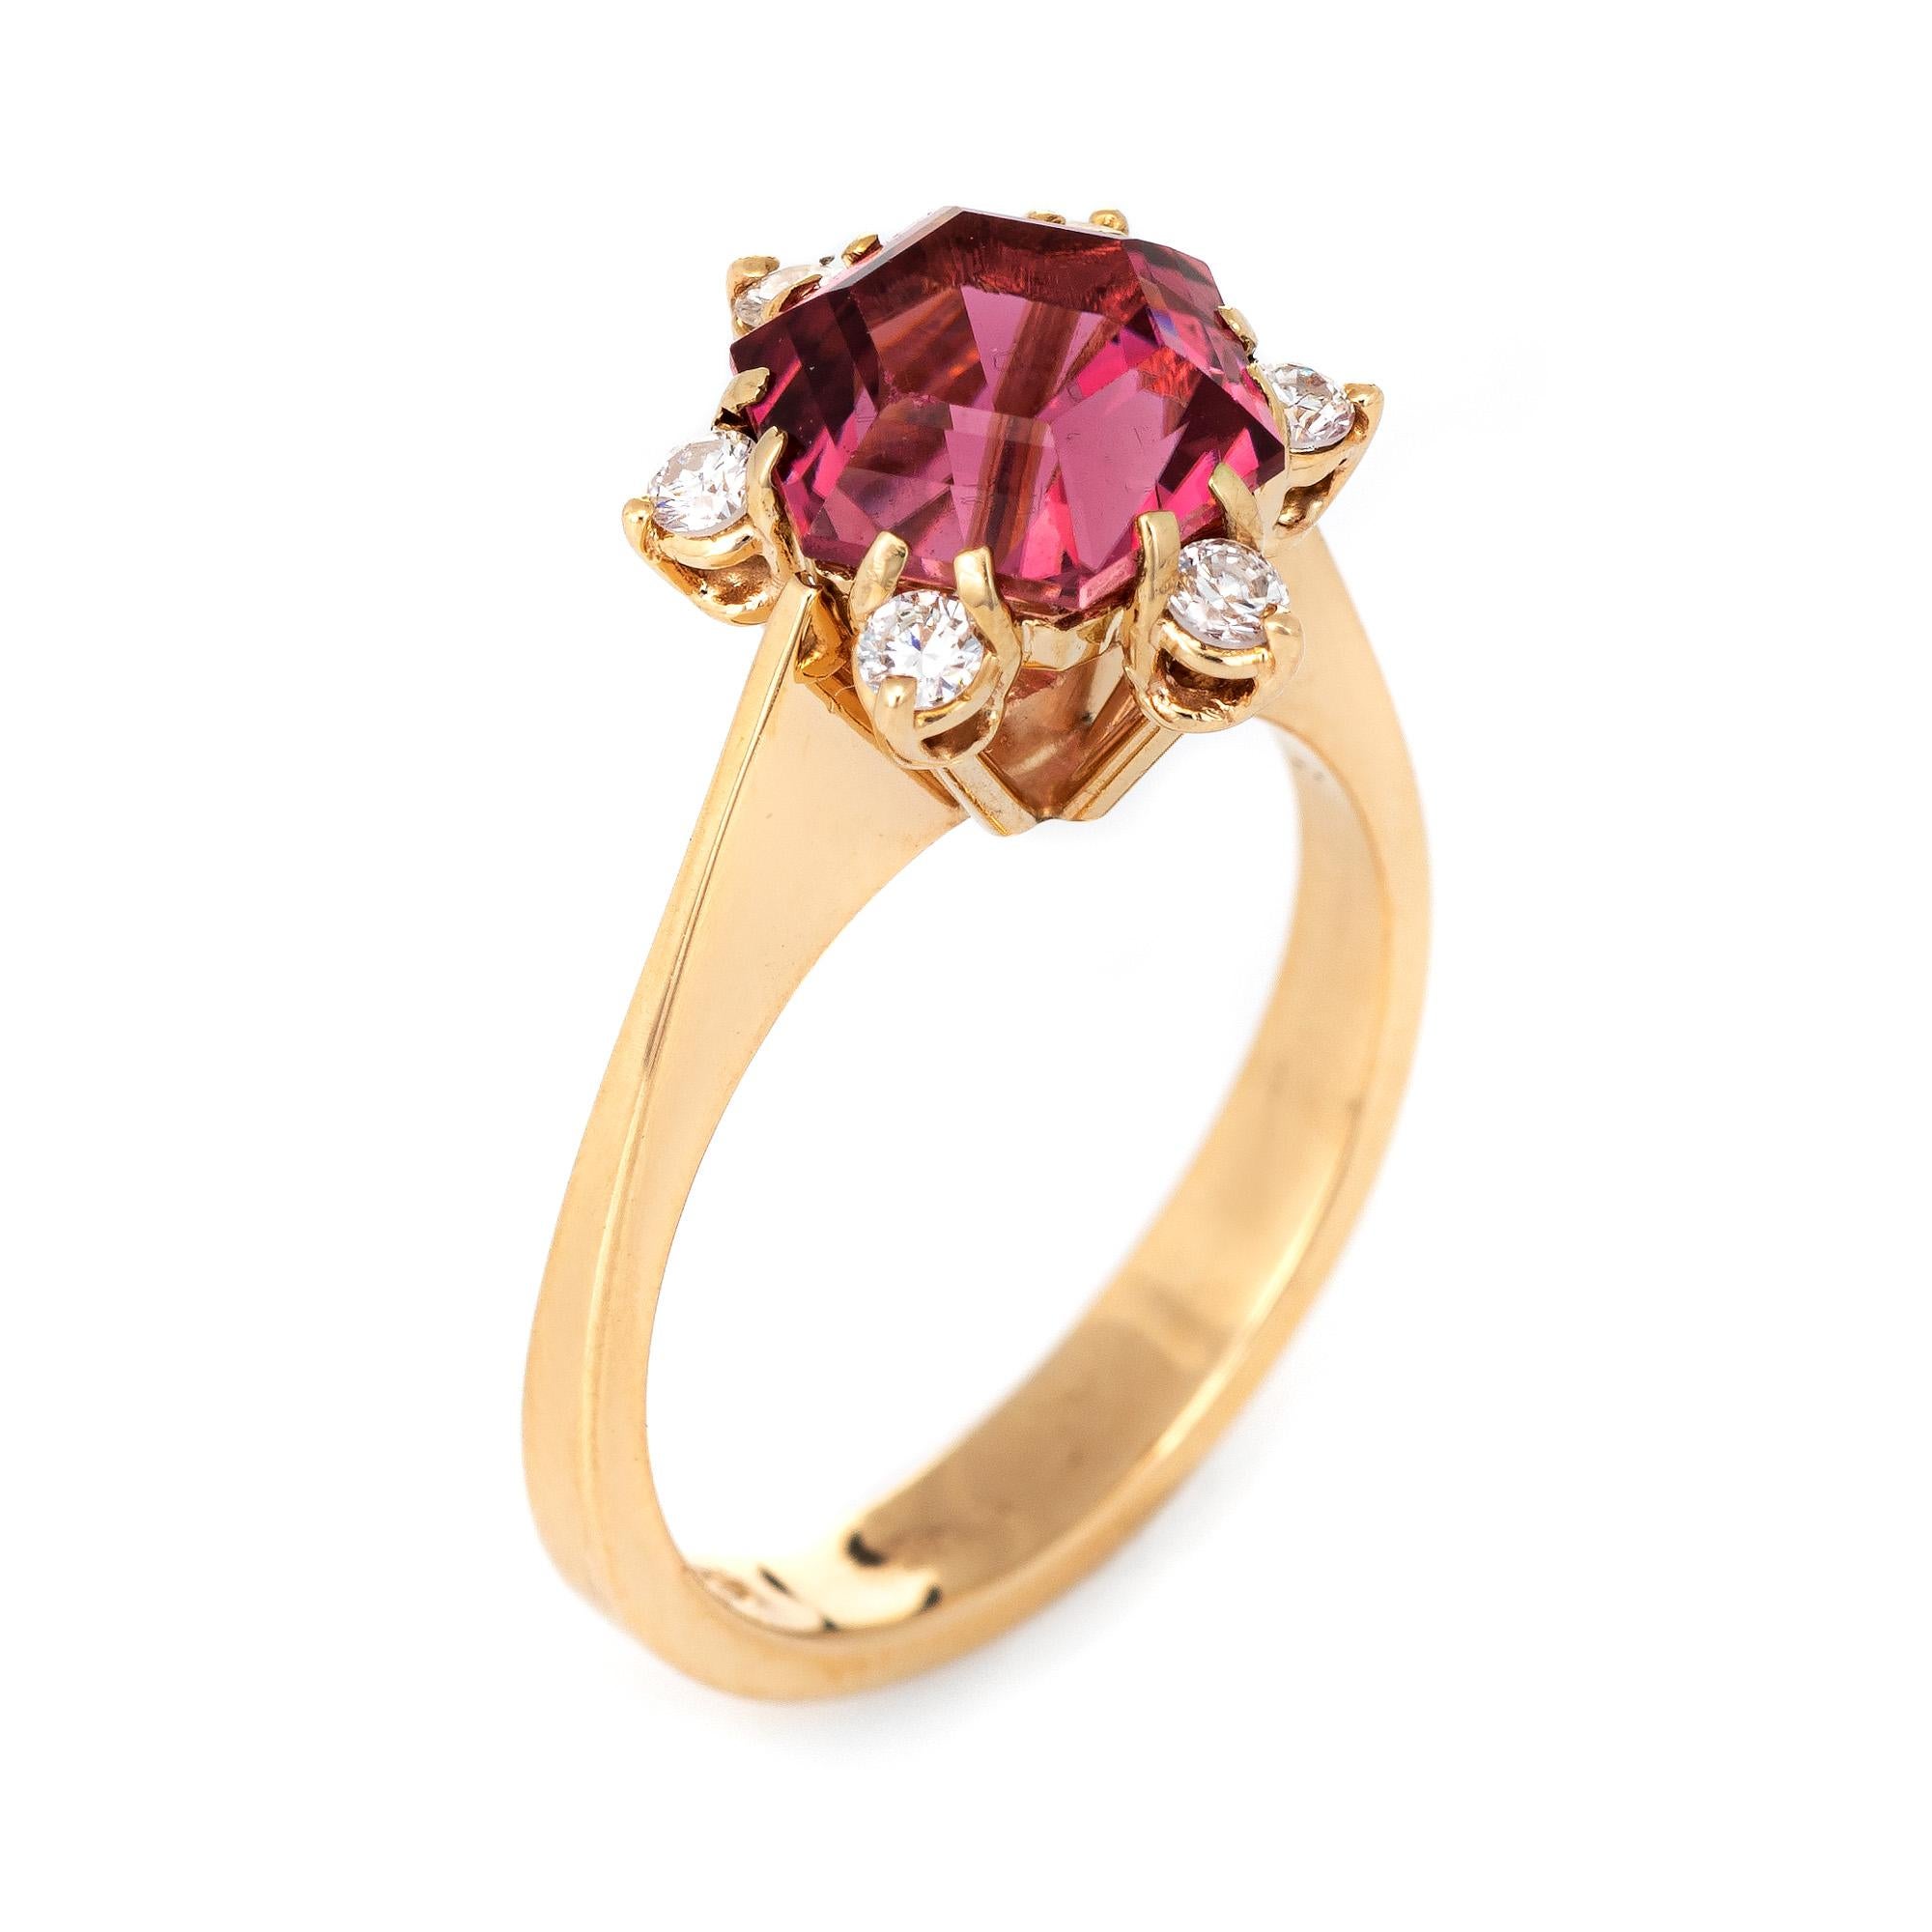 Stylish vintage hexagonal cut pink tourmaline & diamond ring (circa 1970s to 1980s) crafted in 18 karat yellow gold. 

The pink tourmaline measures 8.5mm and estimated at 2 carats. The six diamonds are estimated at 0.02 carats each and total an